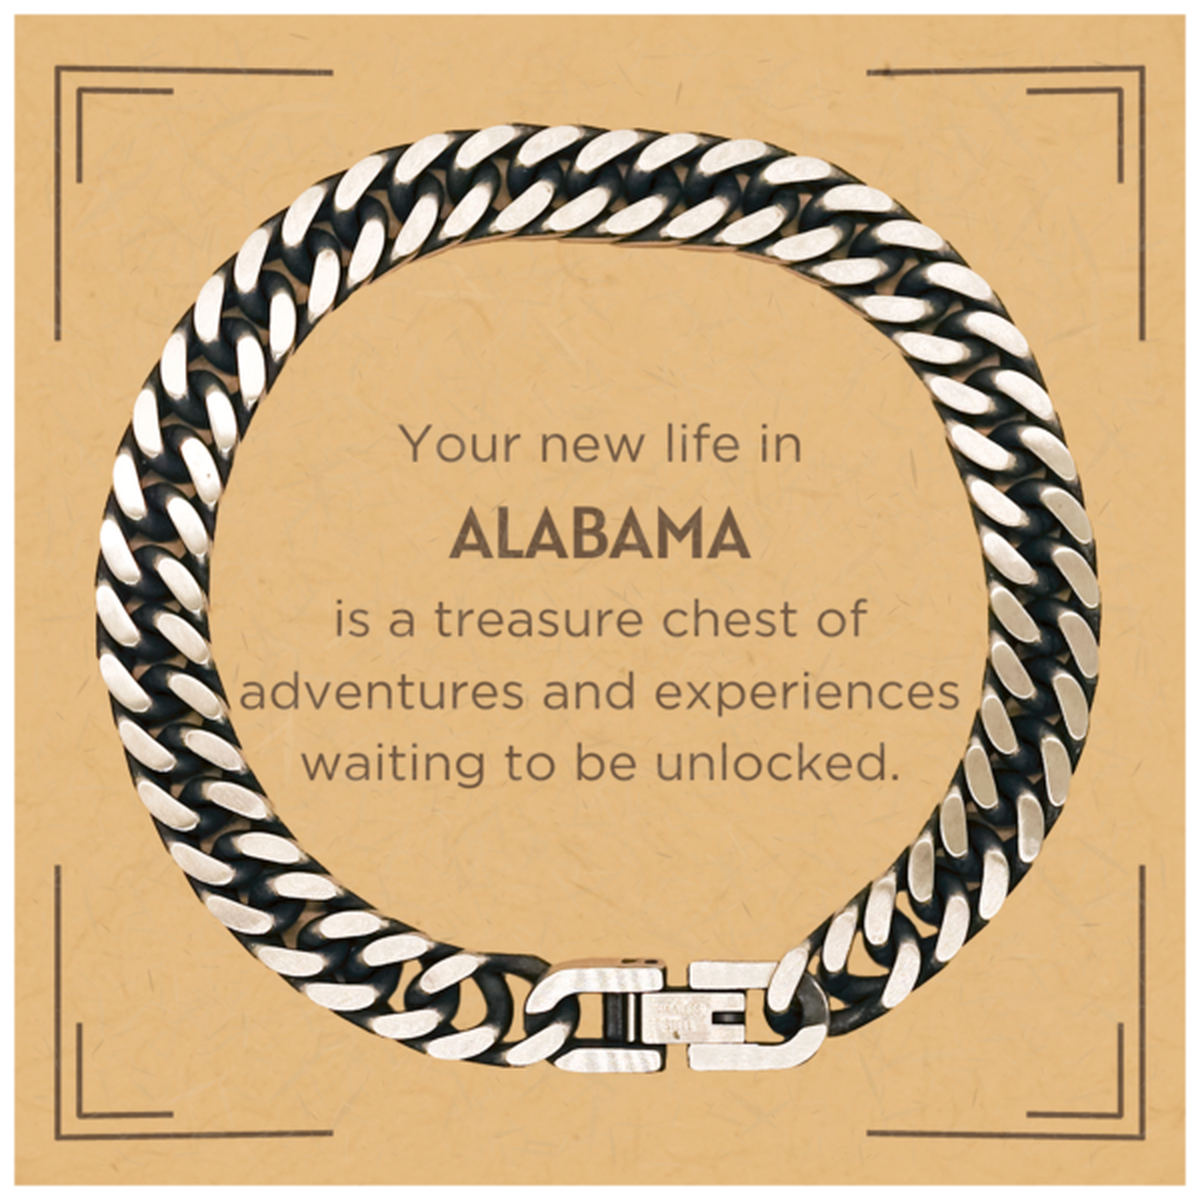 Moving to Alabama Gifts, Your new life in Alabama, Long Distance Alabama Christmas Cuban Link Chain Bracelet For Men, Women, Friends, Coworkers